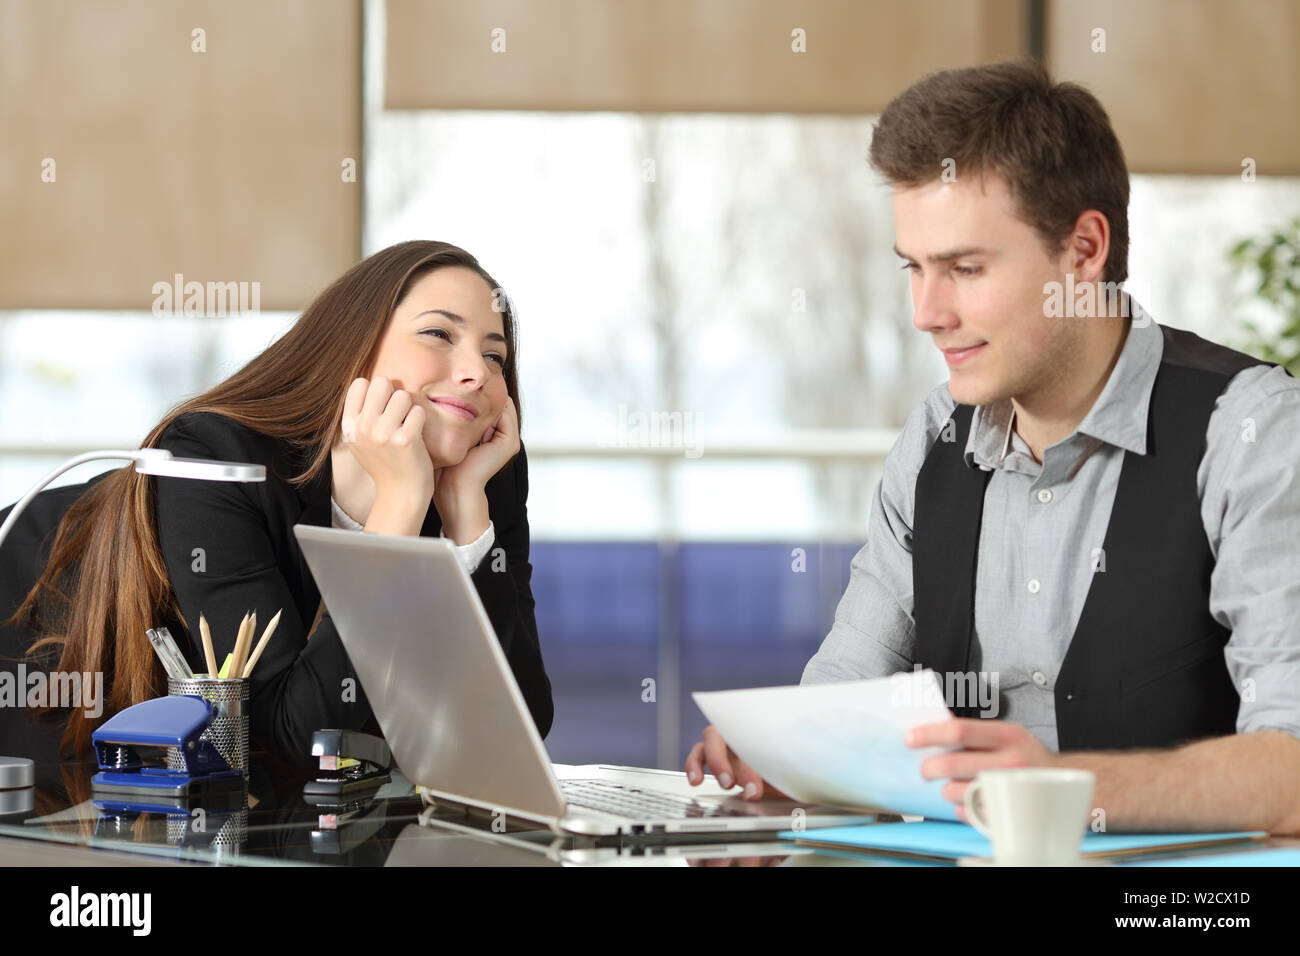 Candid young businesswoman falling in love with a colleague at office Stock Photo